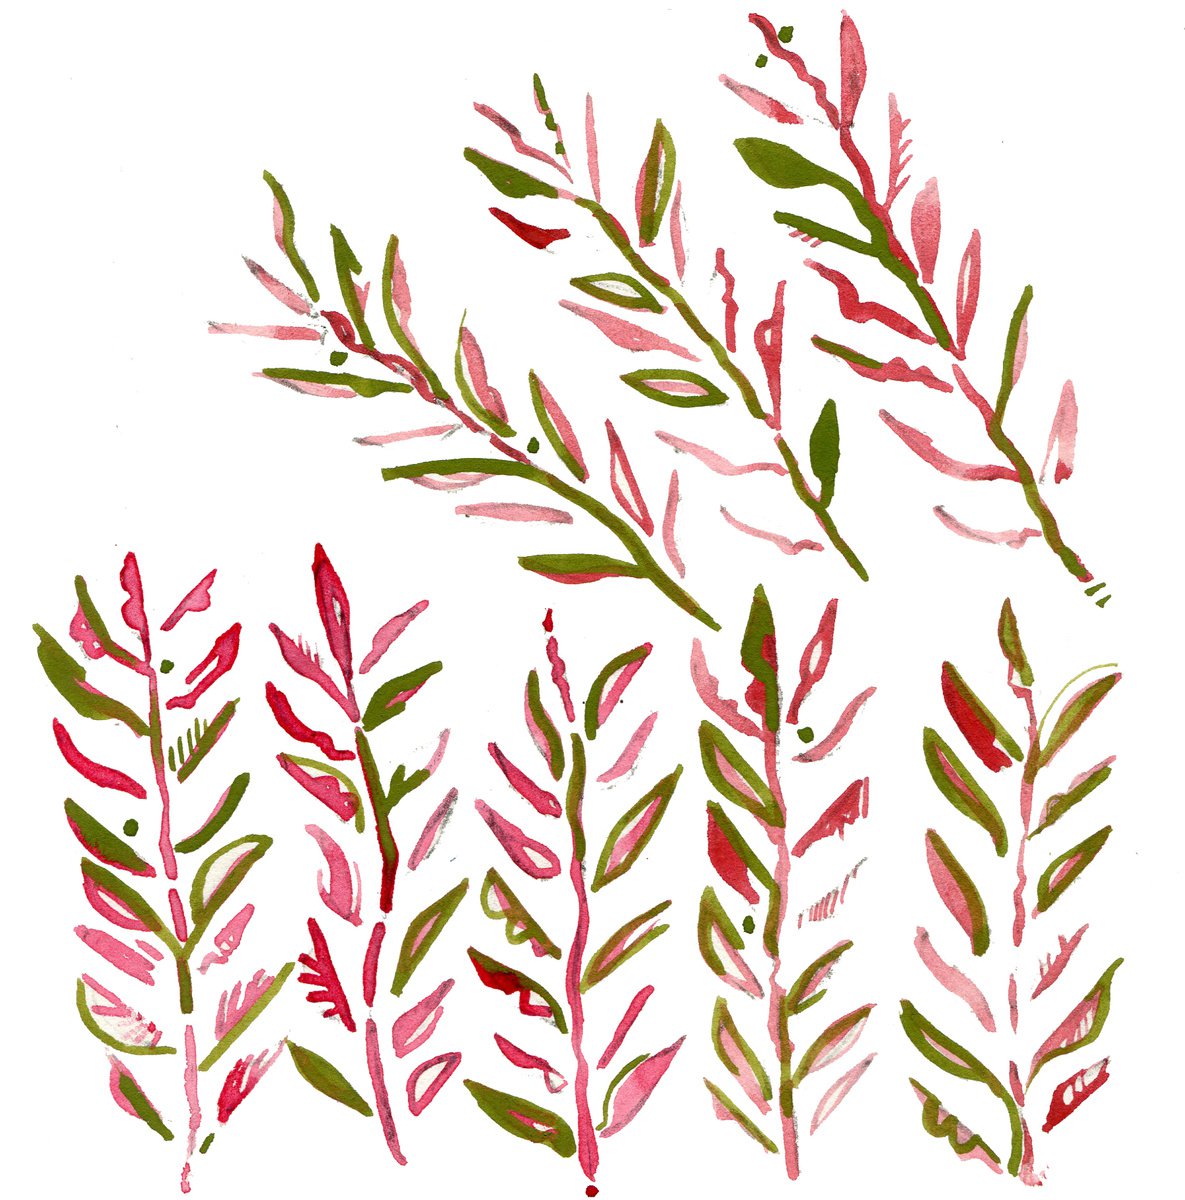 Green and pink leaves by Hannah Clark